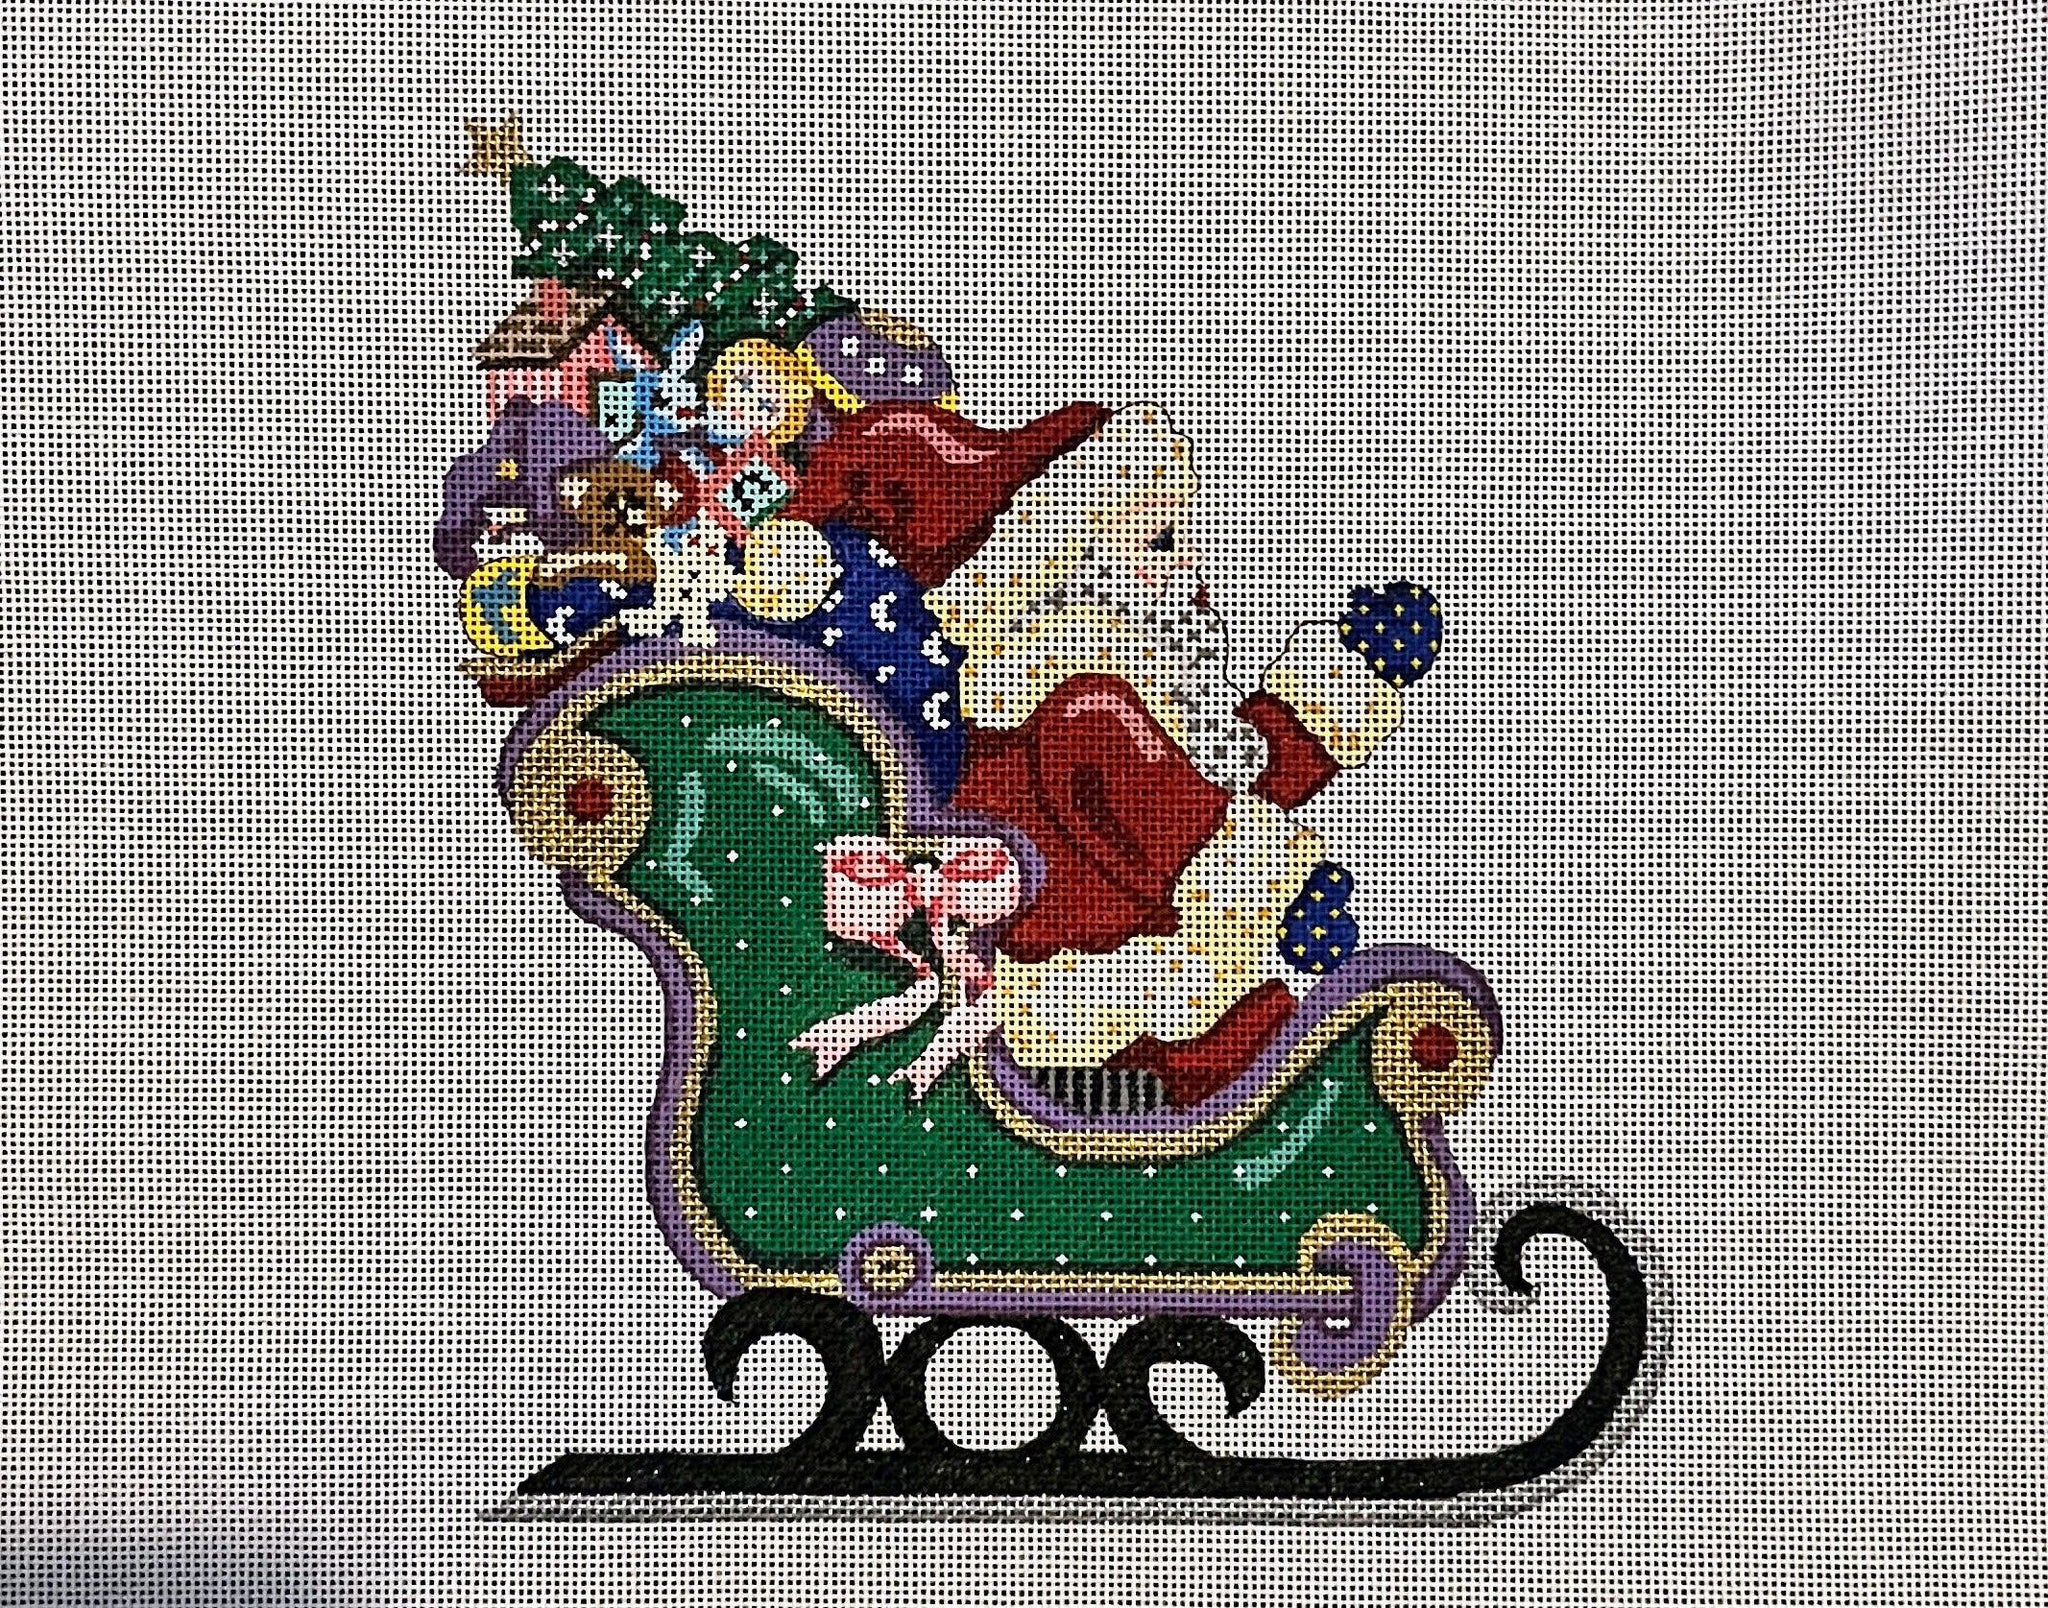 Santa and His Sleigh - Includes Stitch Guide by Susan Burris - Family Arts Needlework Shop